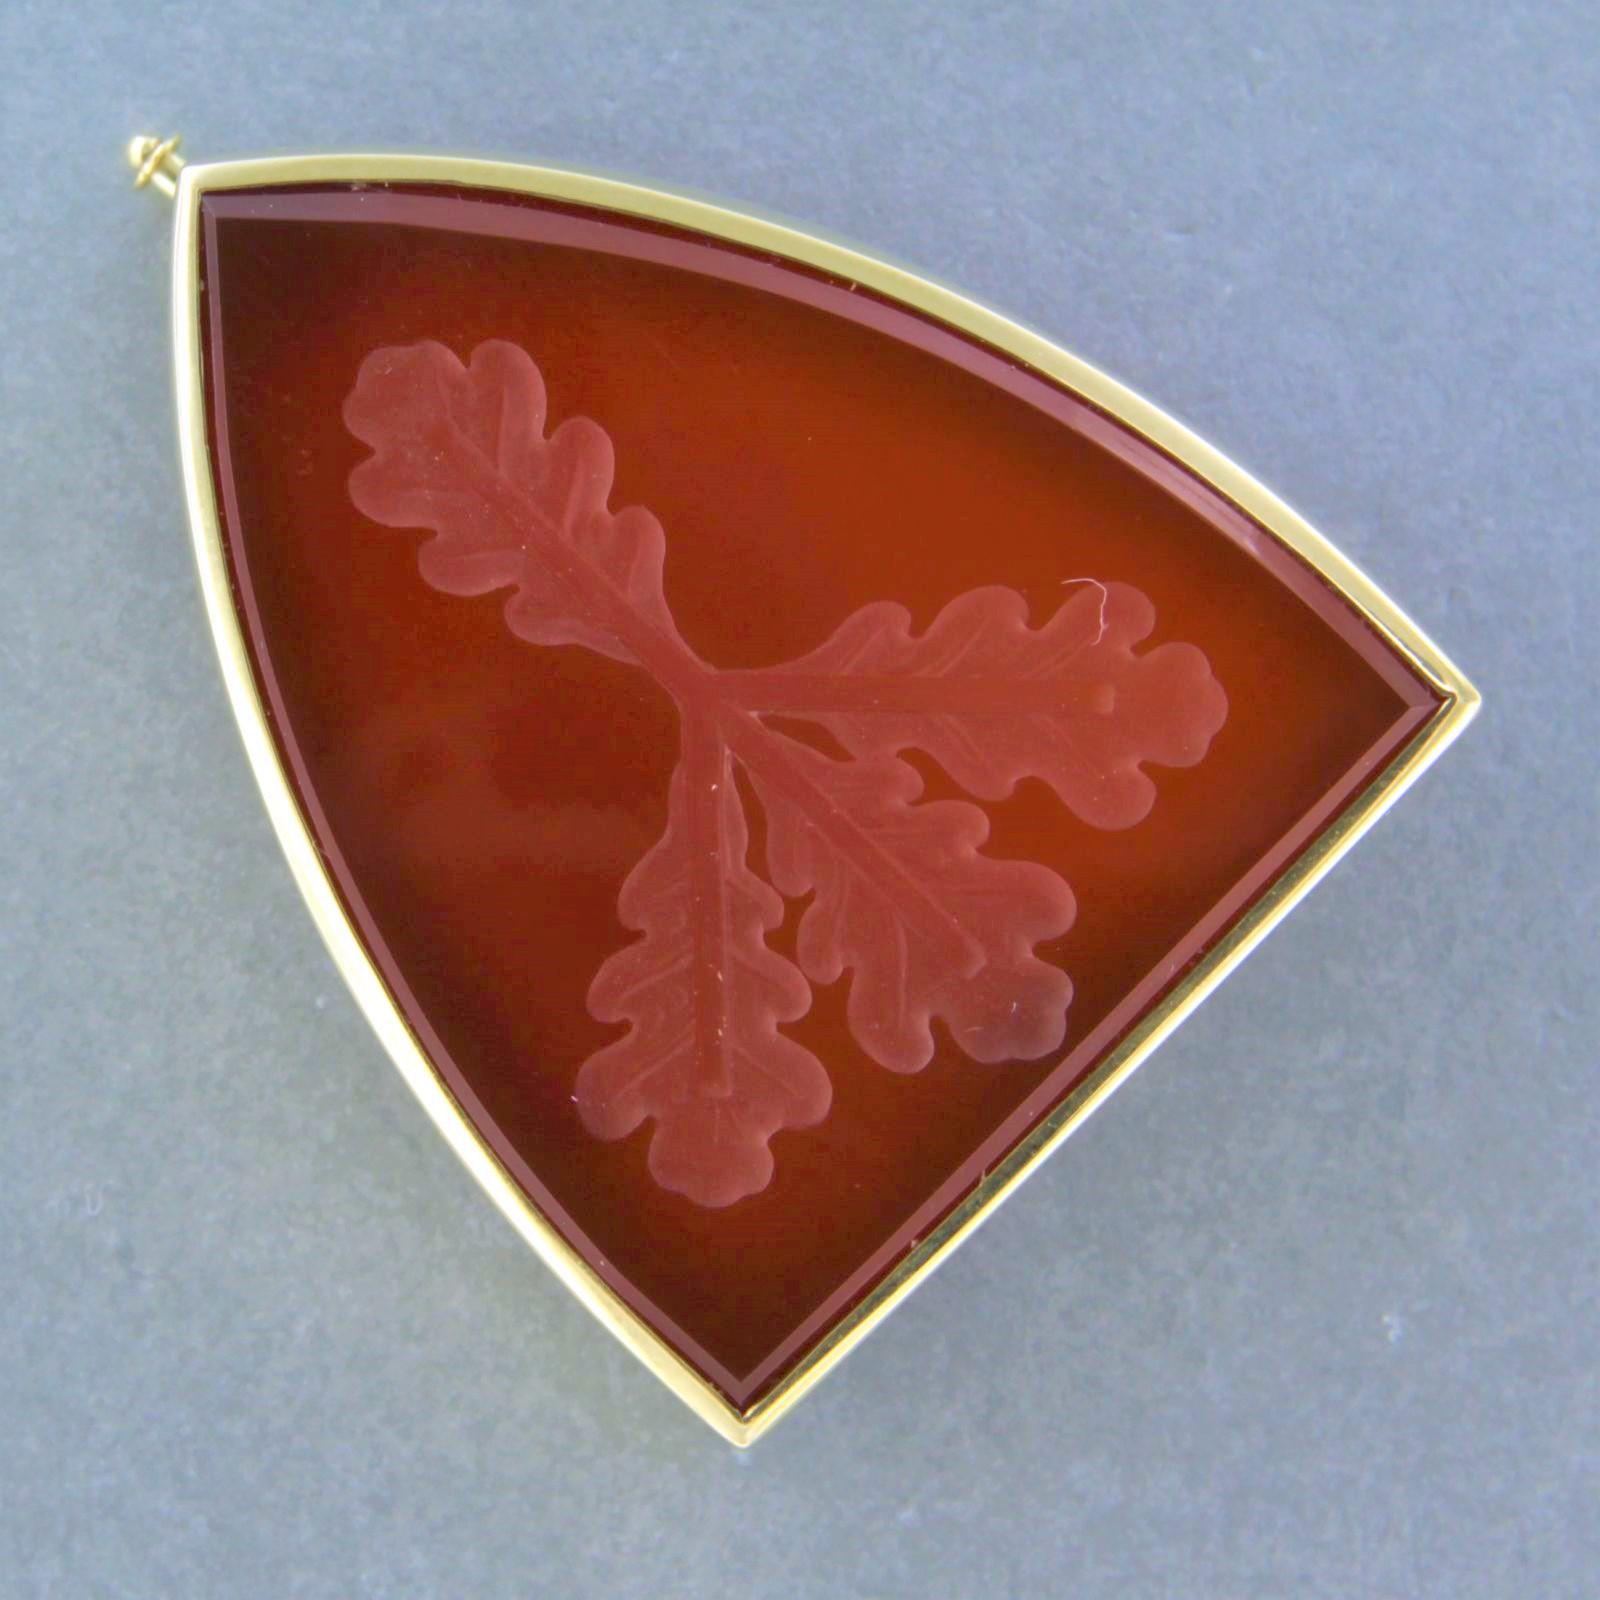 A solid brooch, with carnelian intaglio family crest. Four leaves with unknown origin.

Brooch is made with 14k yellow gold, with carnelian.
Total weight: 26.7 gram, dimensions 3.4 cm x 4.2 cm. 

